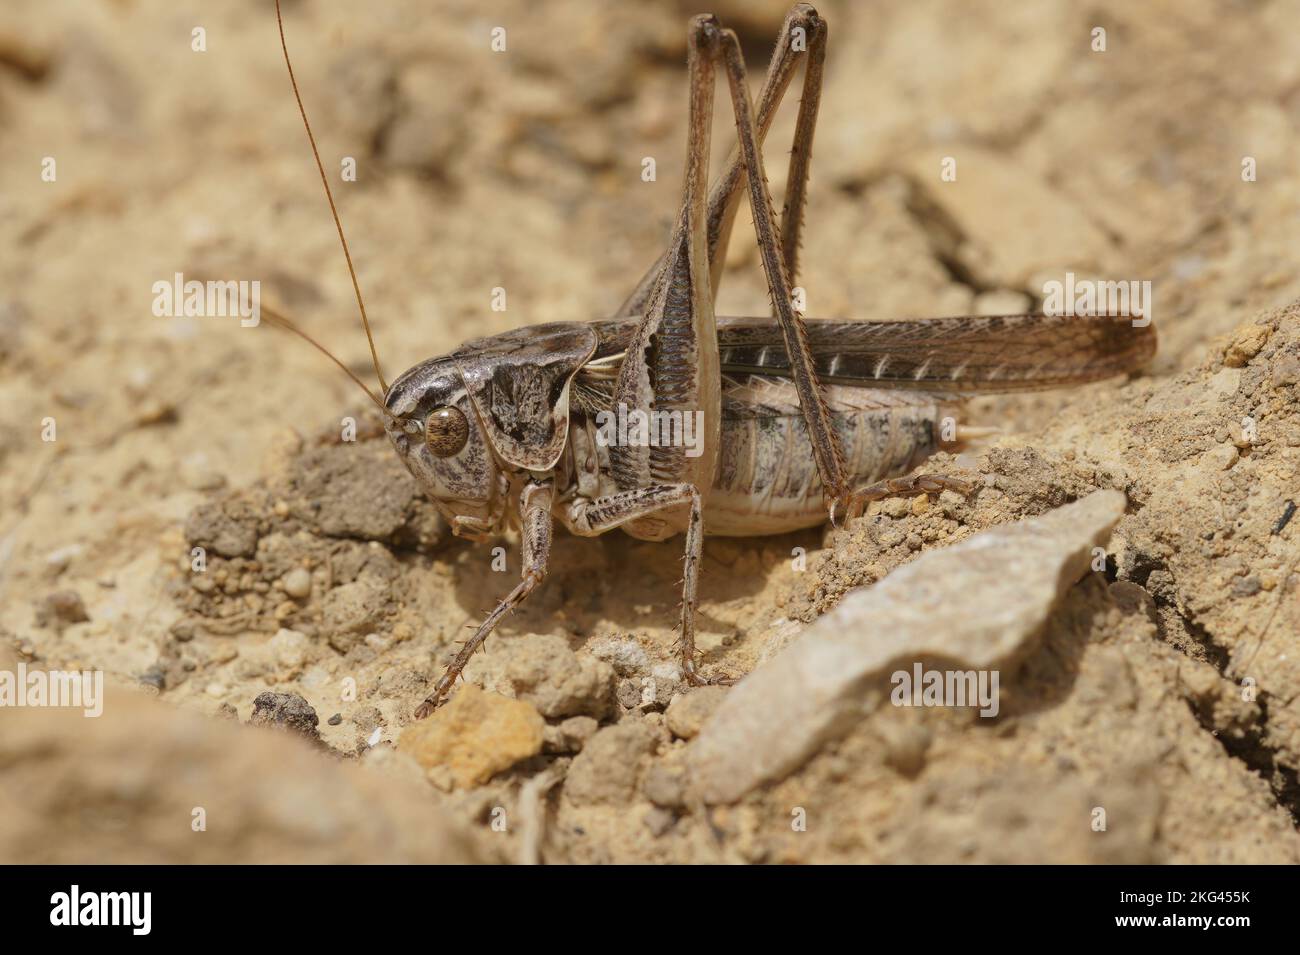 Natural closeup on a brown Mediterranean long-horned grasshopper, Platycleis sabulosa sitting on the ground Stock Photo